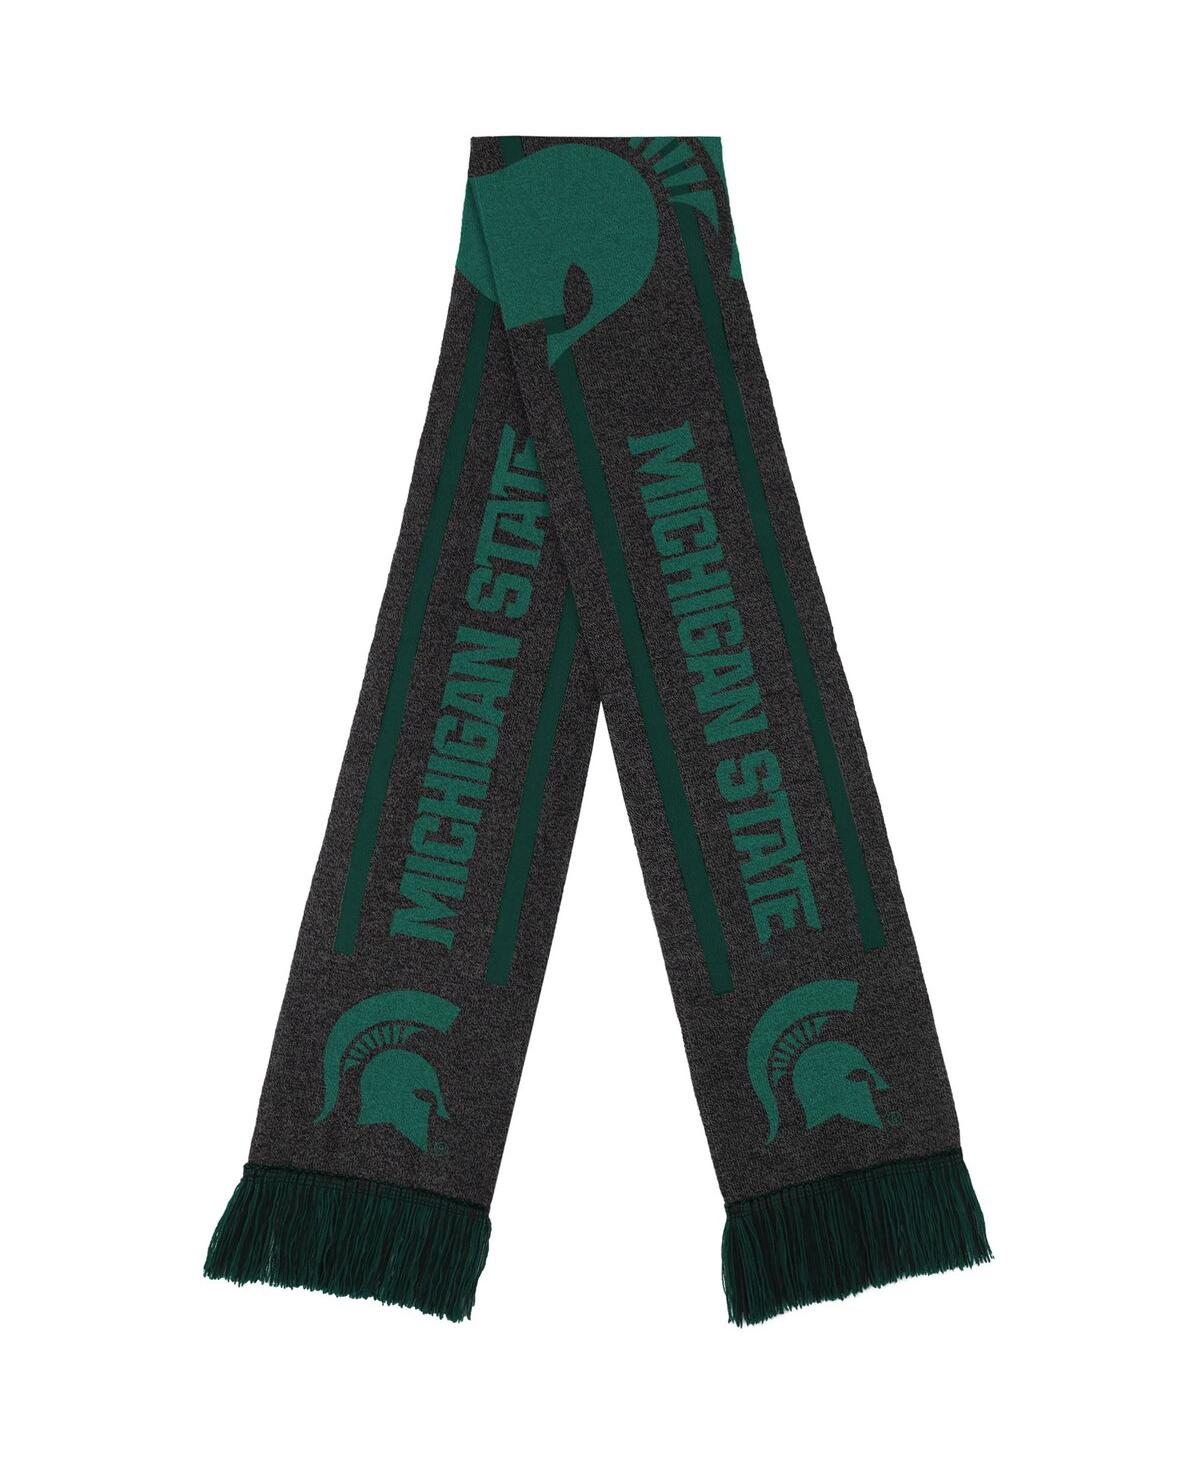 FOCO MEN'S AND WOMEN'S MICHIGAN STATE SPARTANS SCARF